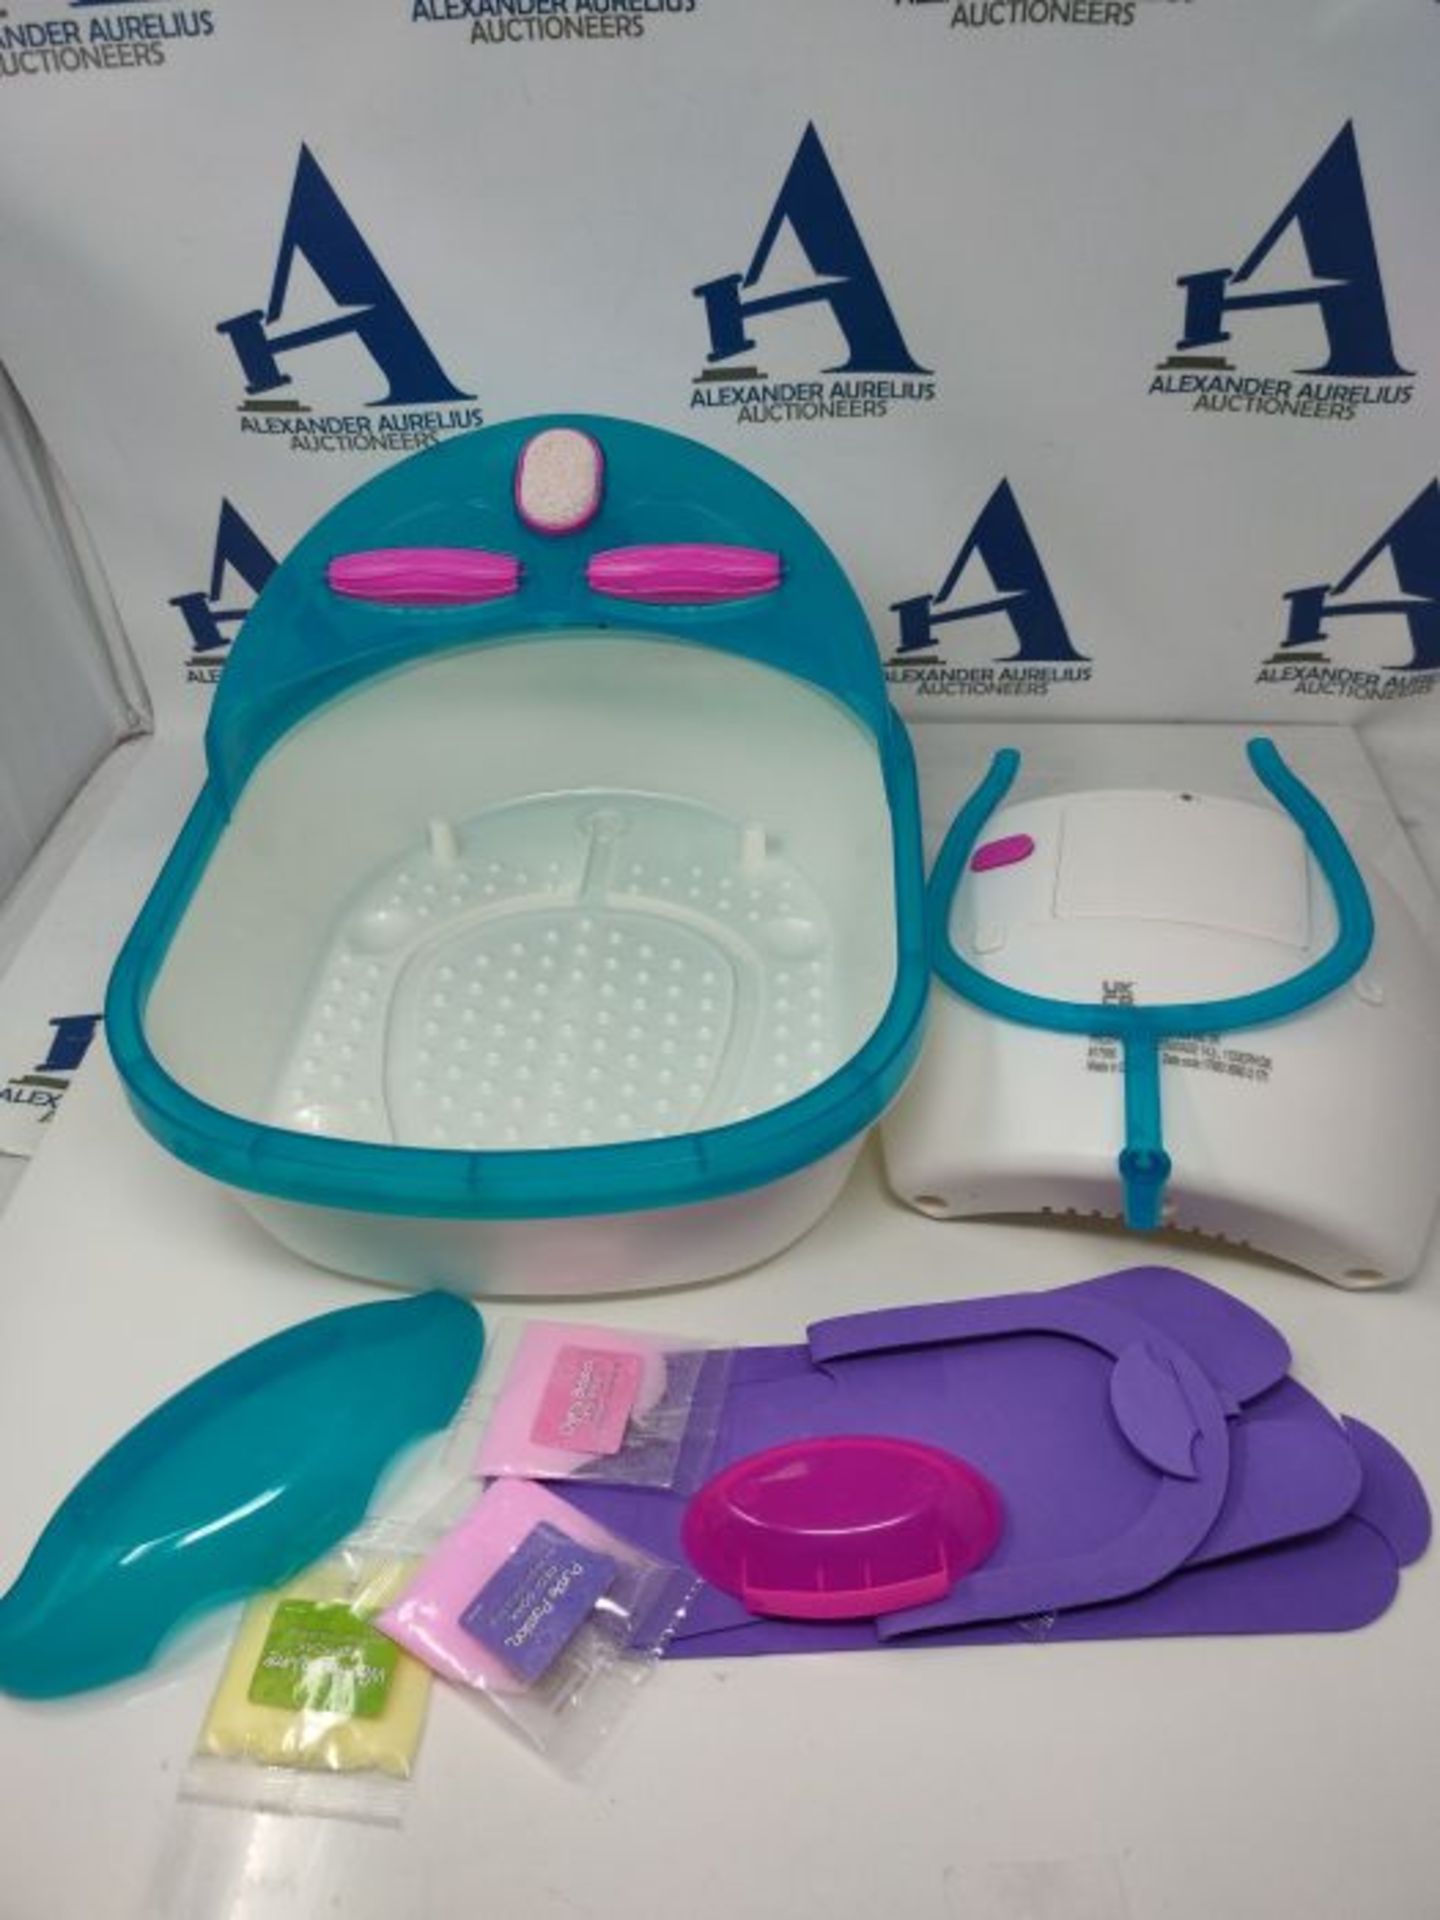 Shimmer N Sparkle 6in1 Real Foot Massaging pedicure spa - colour-changing massaging, r - Image 3 of 3